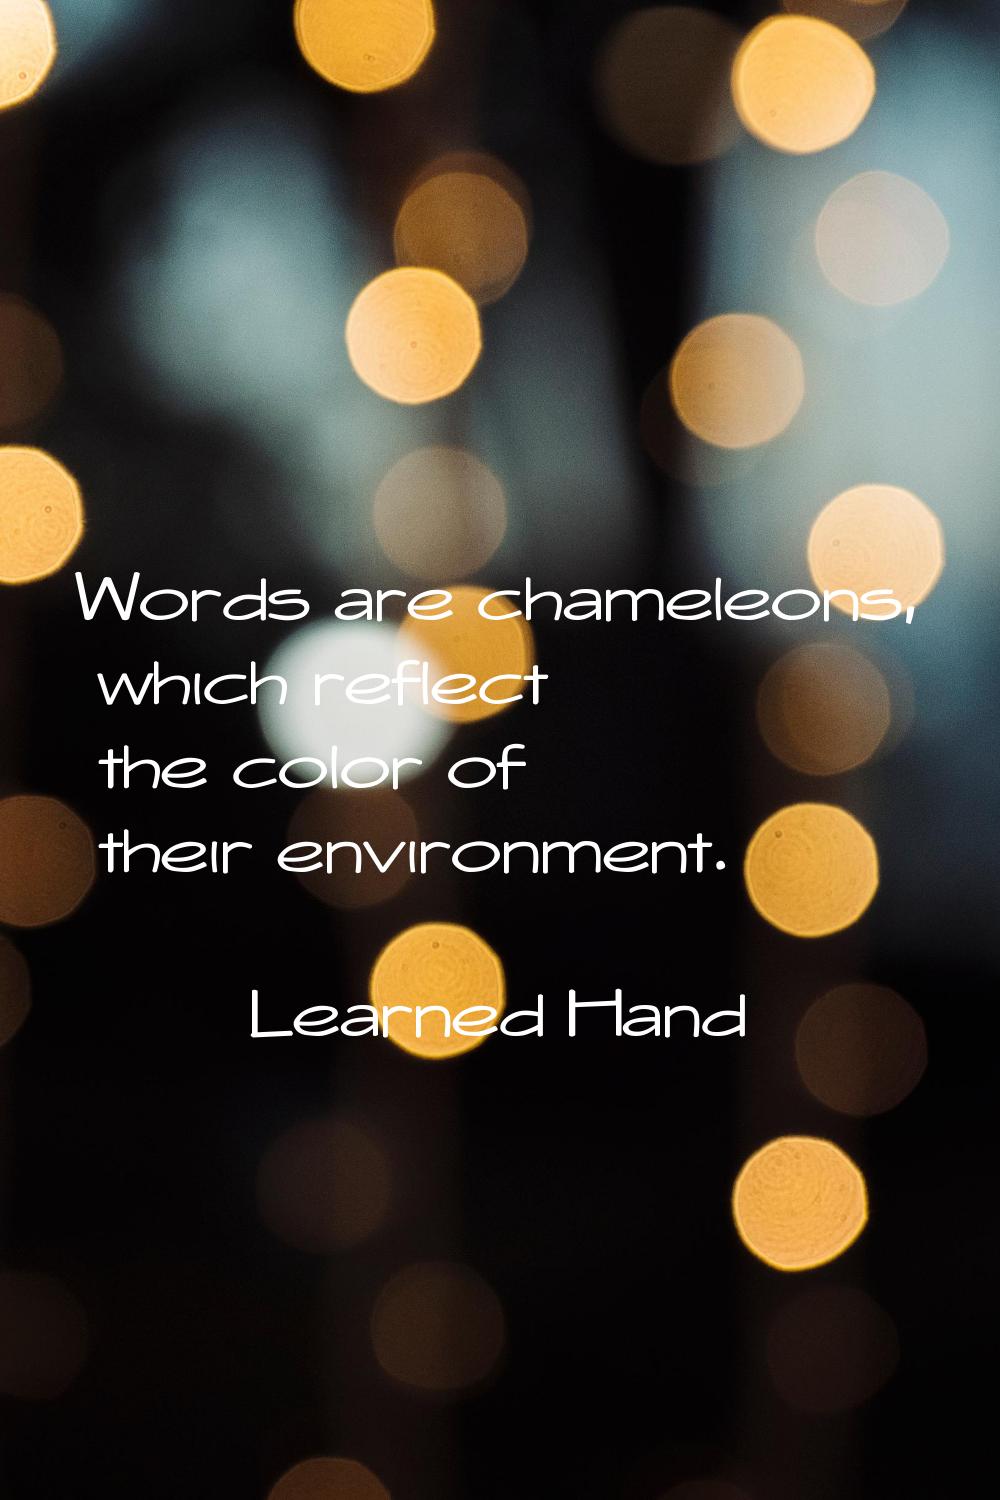 Words are chameleons, which reflect the color of their environment.